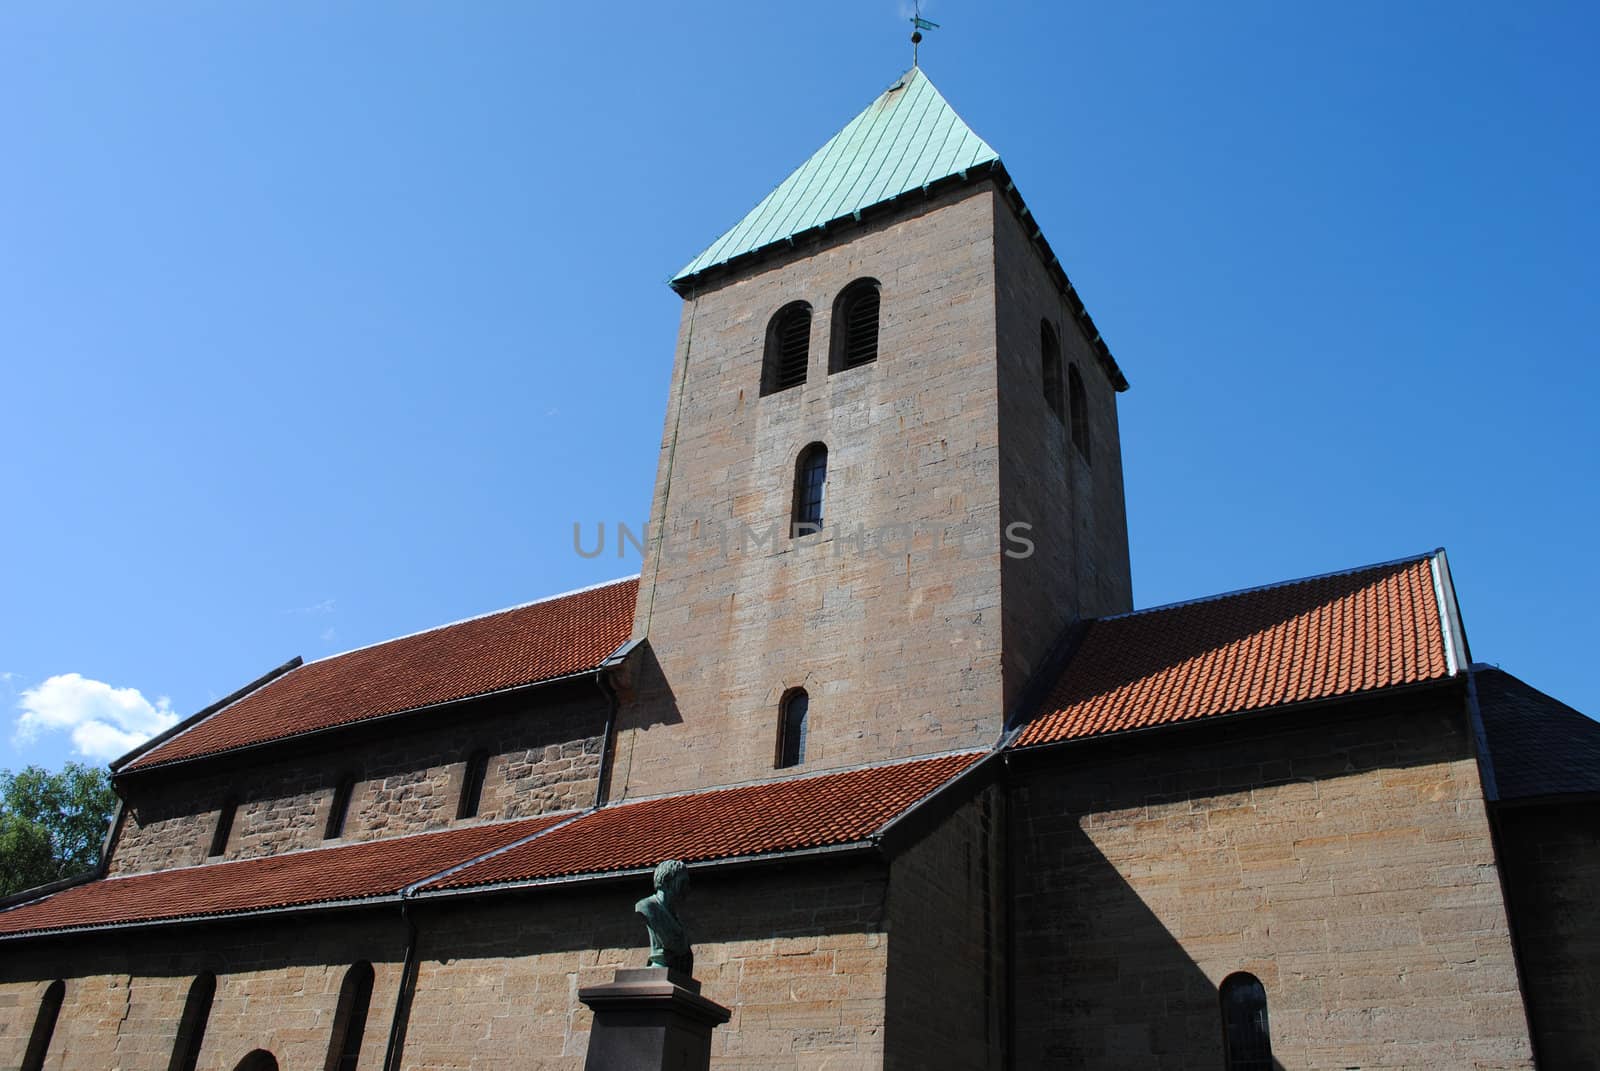 The Old Aker Church is the oldest standing building in Oslo. It was built in the 1100s and is located at Akersbakken 26.